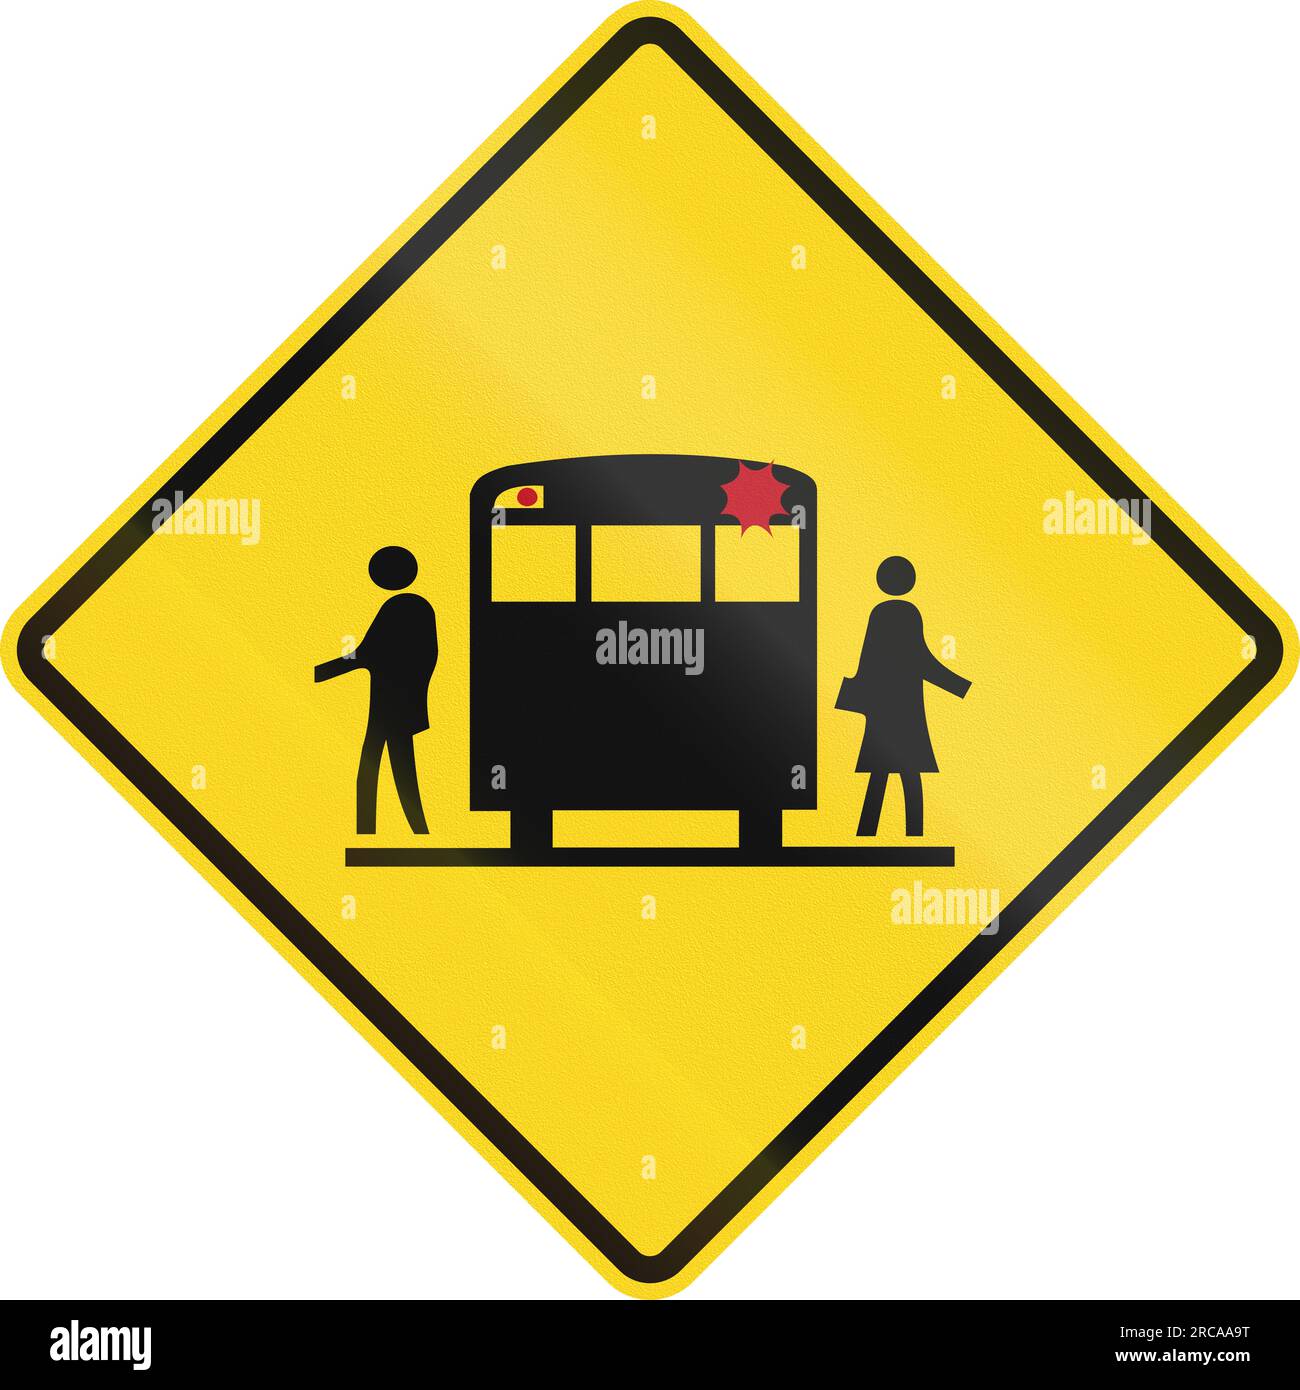 Canadian school warning sign - School bus stop ahead. This sign is used in Ontario. Stock Photo